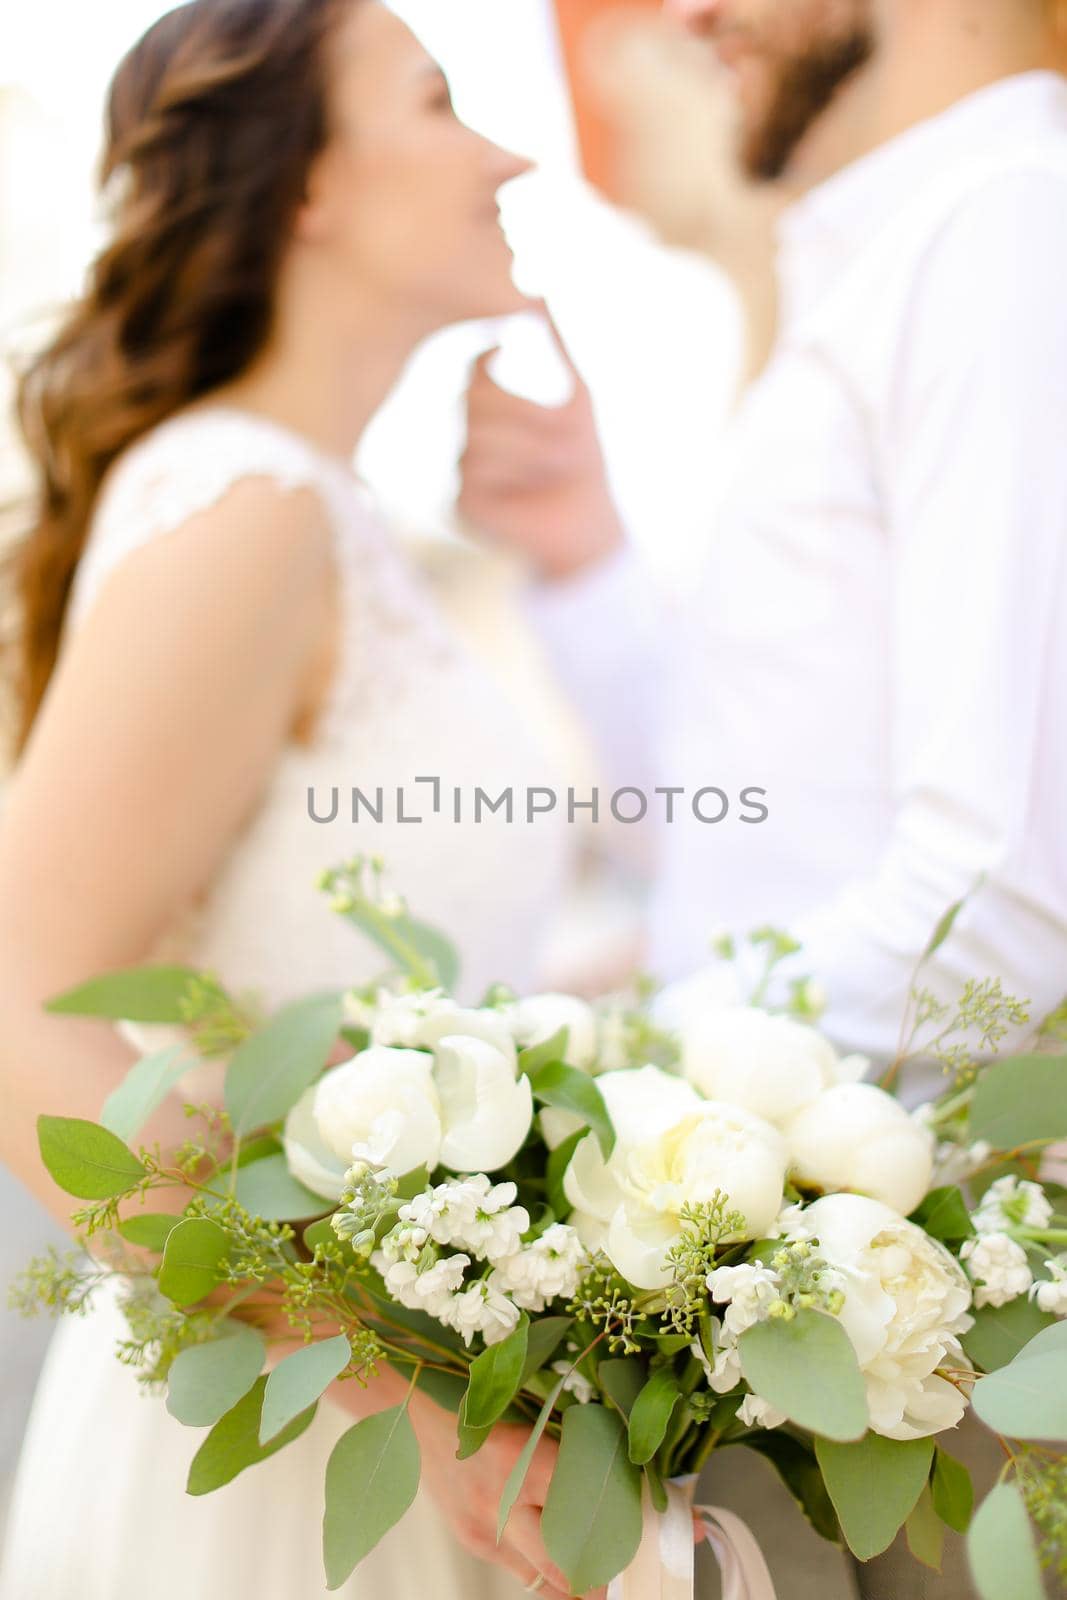 Happy groom hugging beautiful bride keeping flowers and wearing white dress. Concept of married couple and love, wedding photo session.